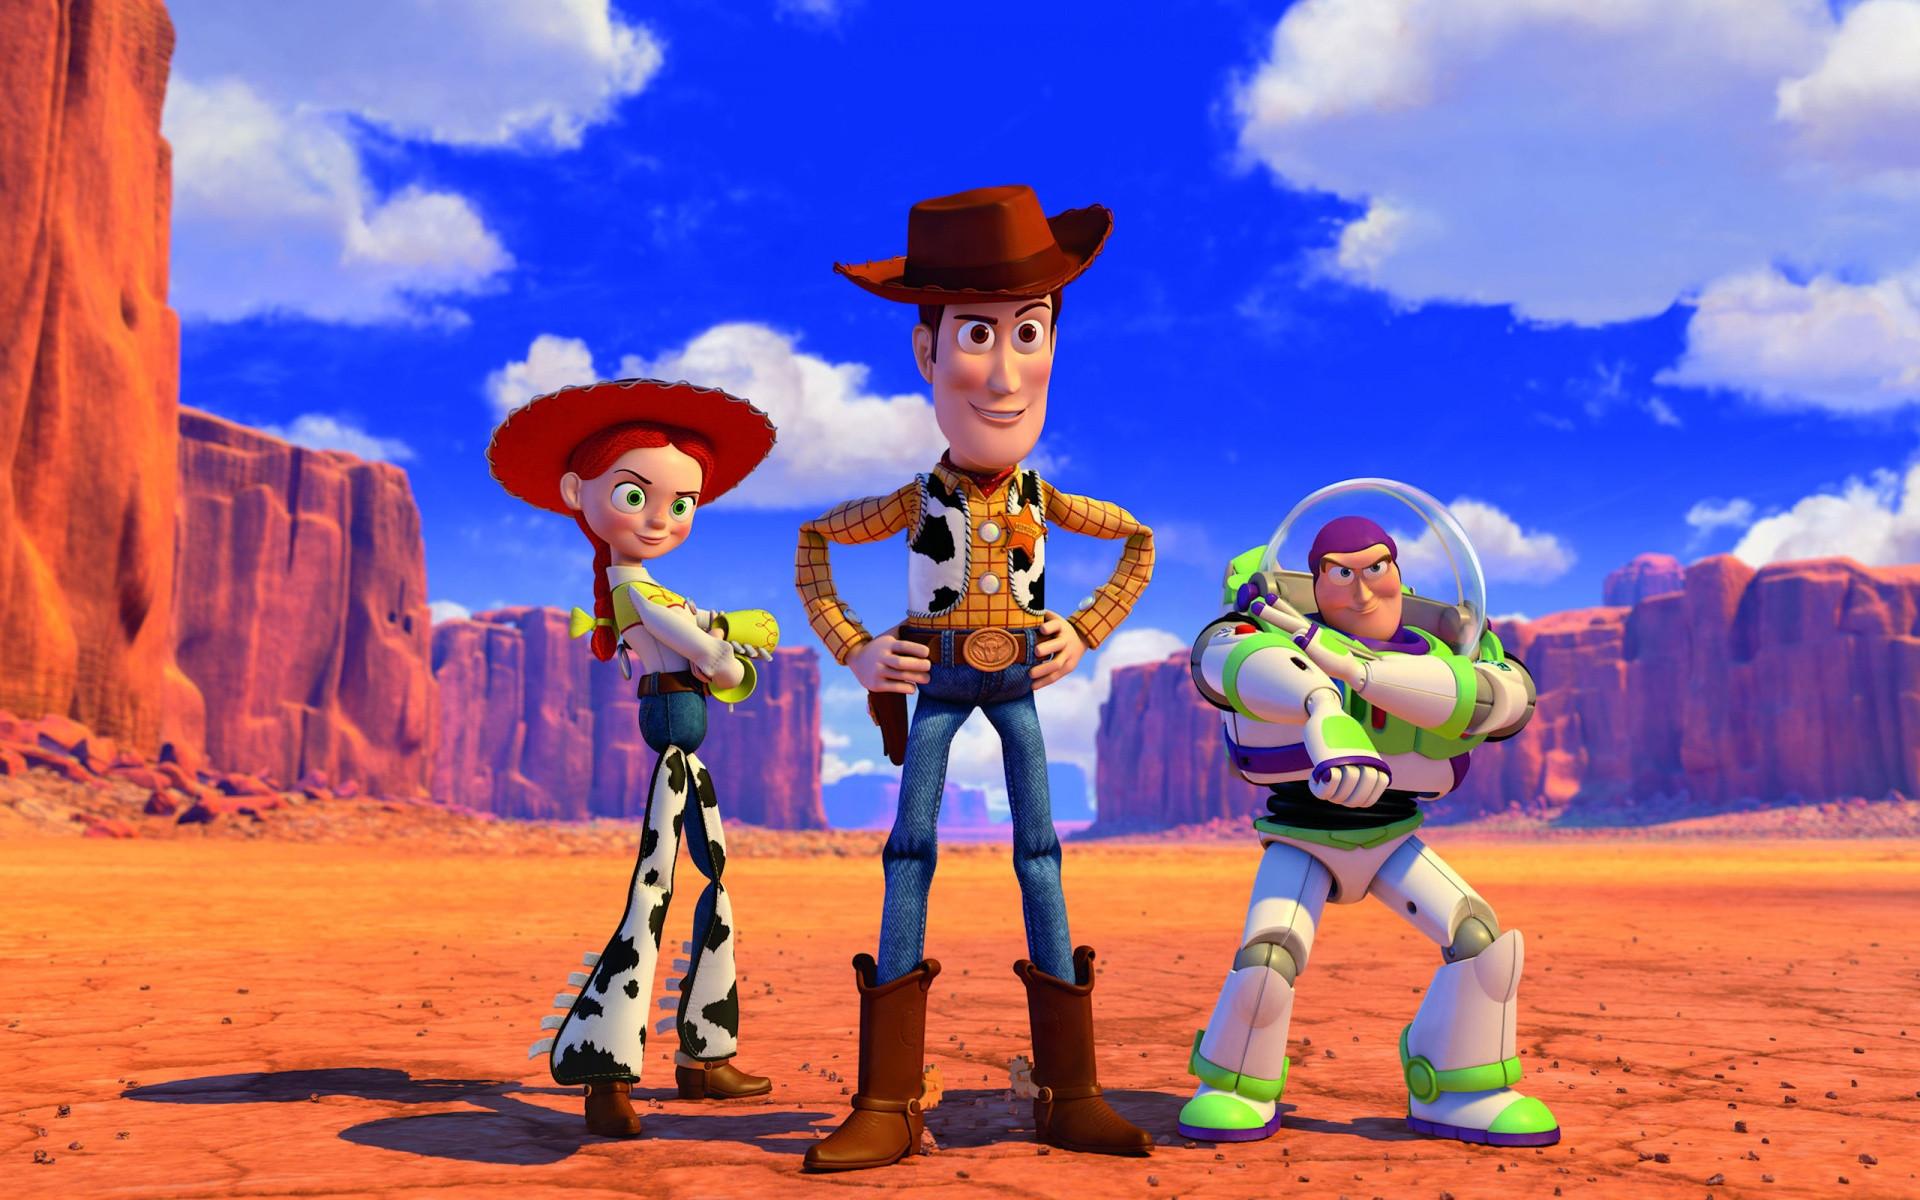 Toy Story 3 Wallpapers Full Hd Wallpaper Search | HD Wallpapers Range